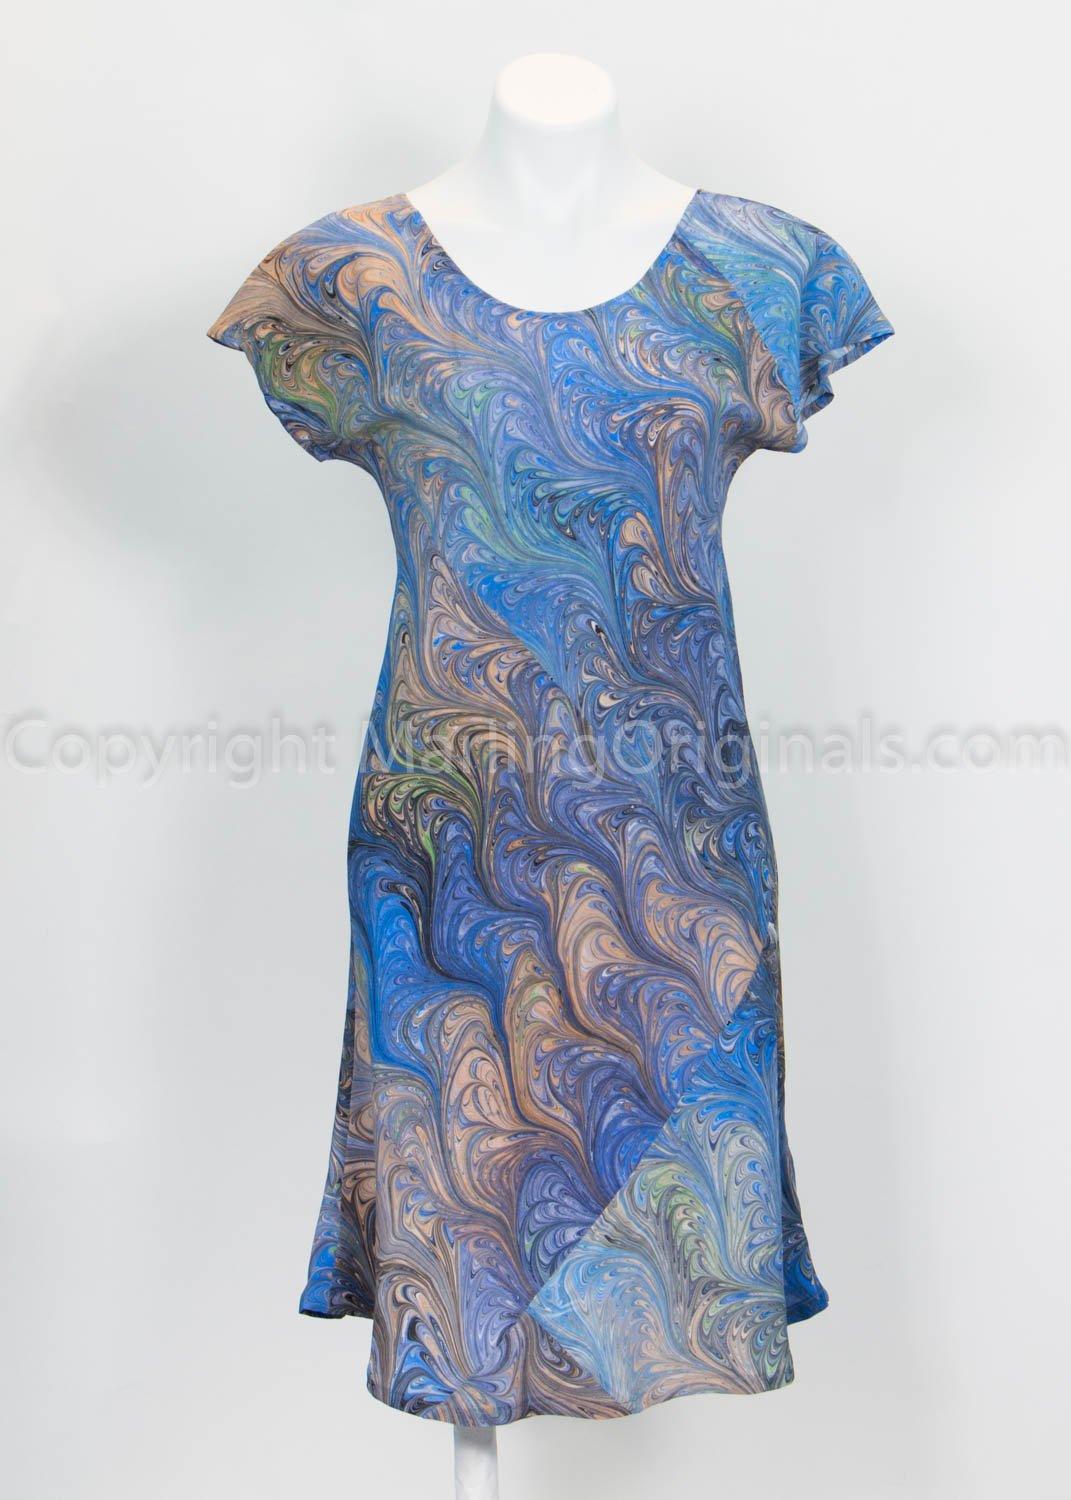 marbled bias cut dress for business professionals